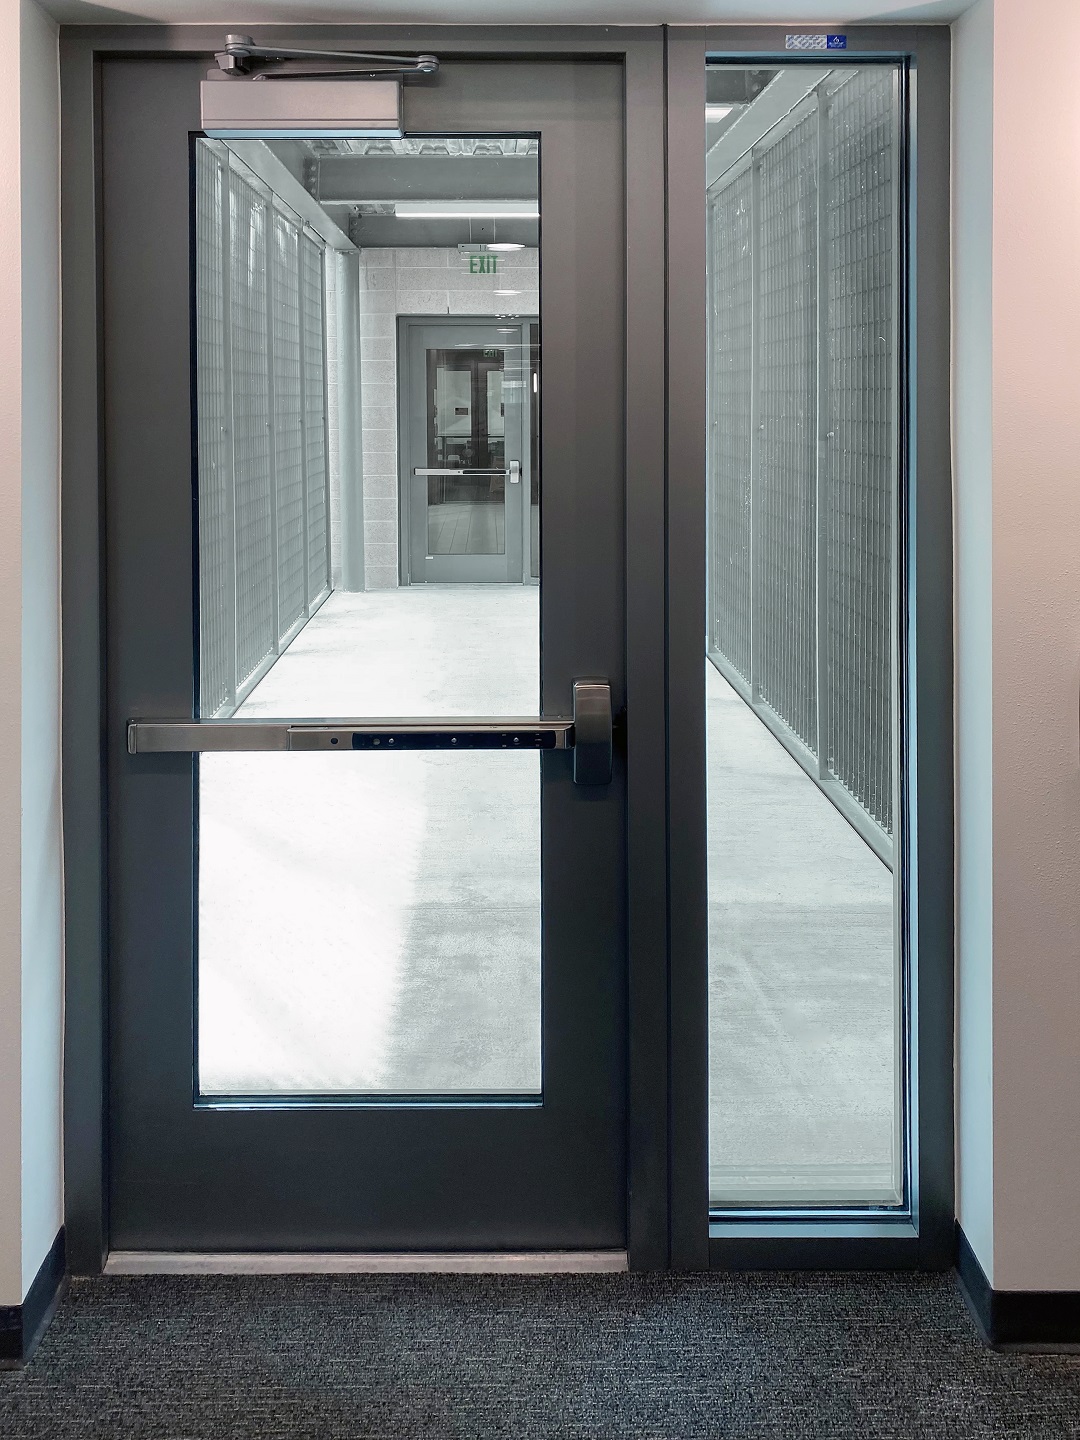 The door vision area in this 45 minute door exceeds 1,296 square inches thanks to SuperClear 45-HS-LI used in the door vision area and adjacent sidelite.